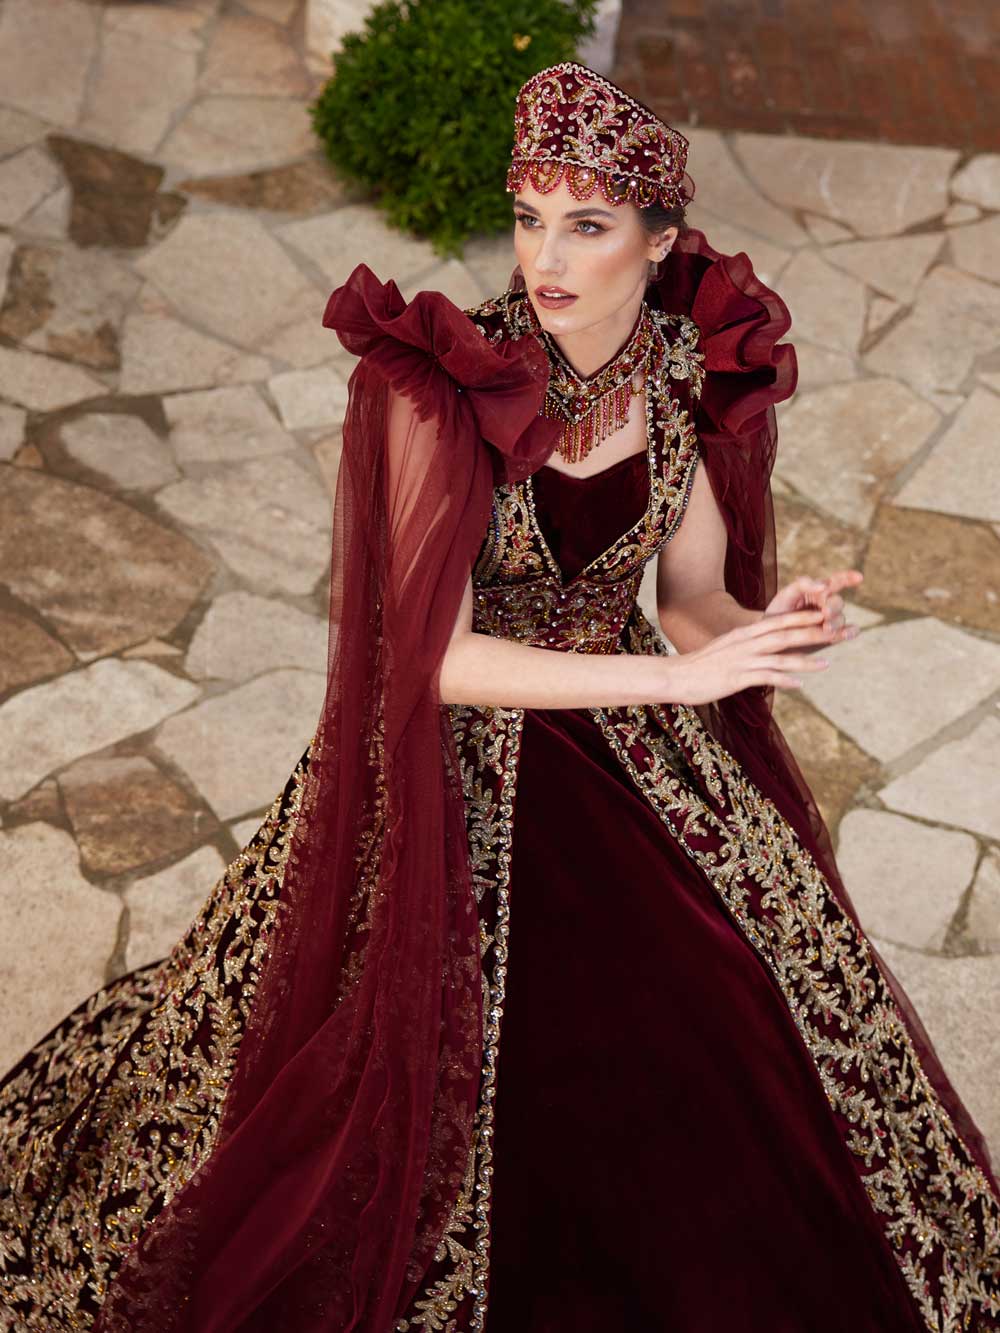 Maroon Velvet Fully Sequined Gold Lace Sweetheart Turkish Henna Kaftan Gown 543_1310 (5)